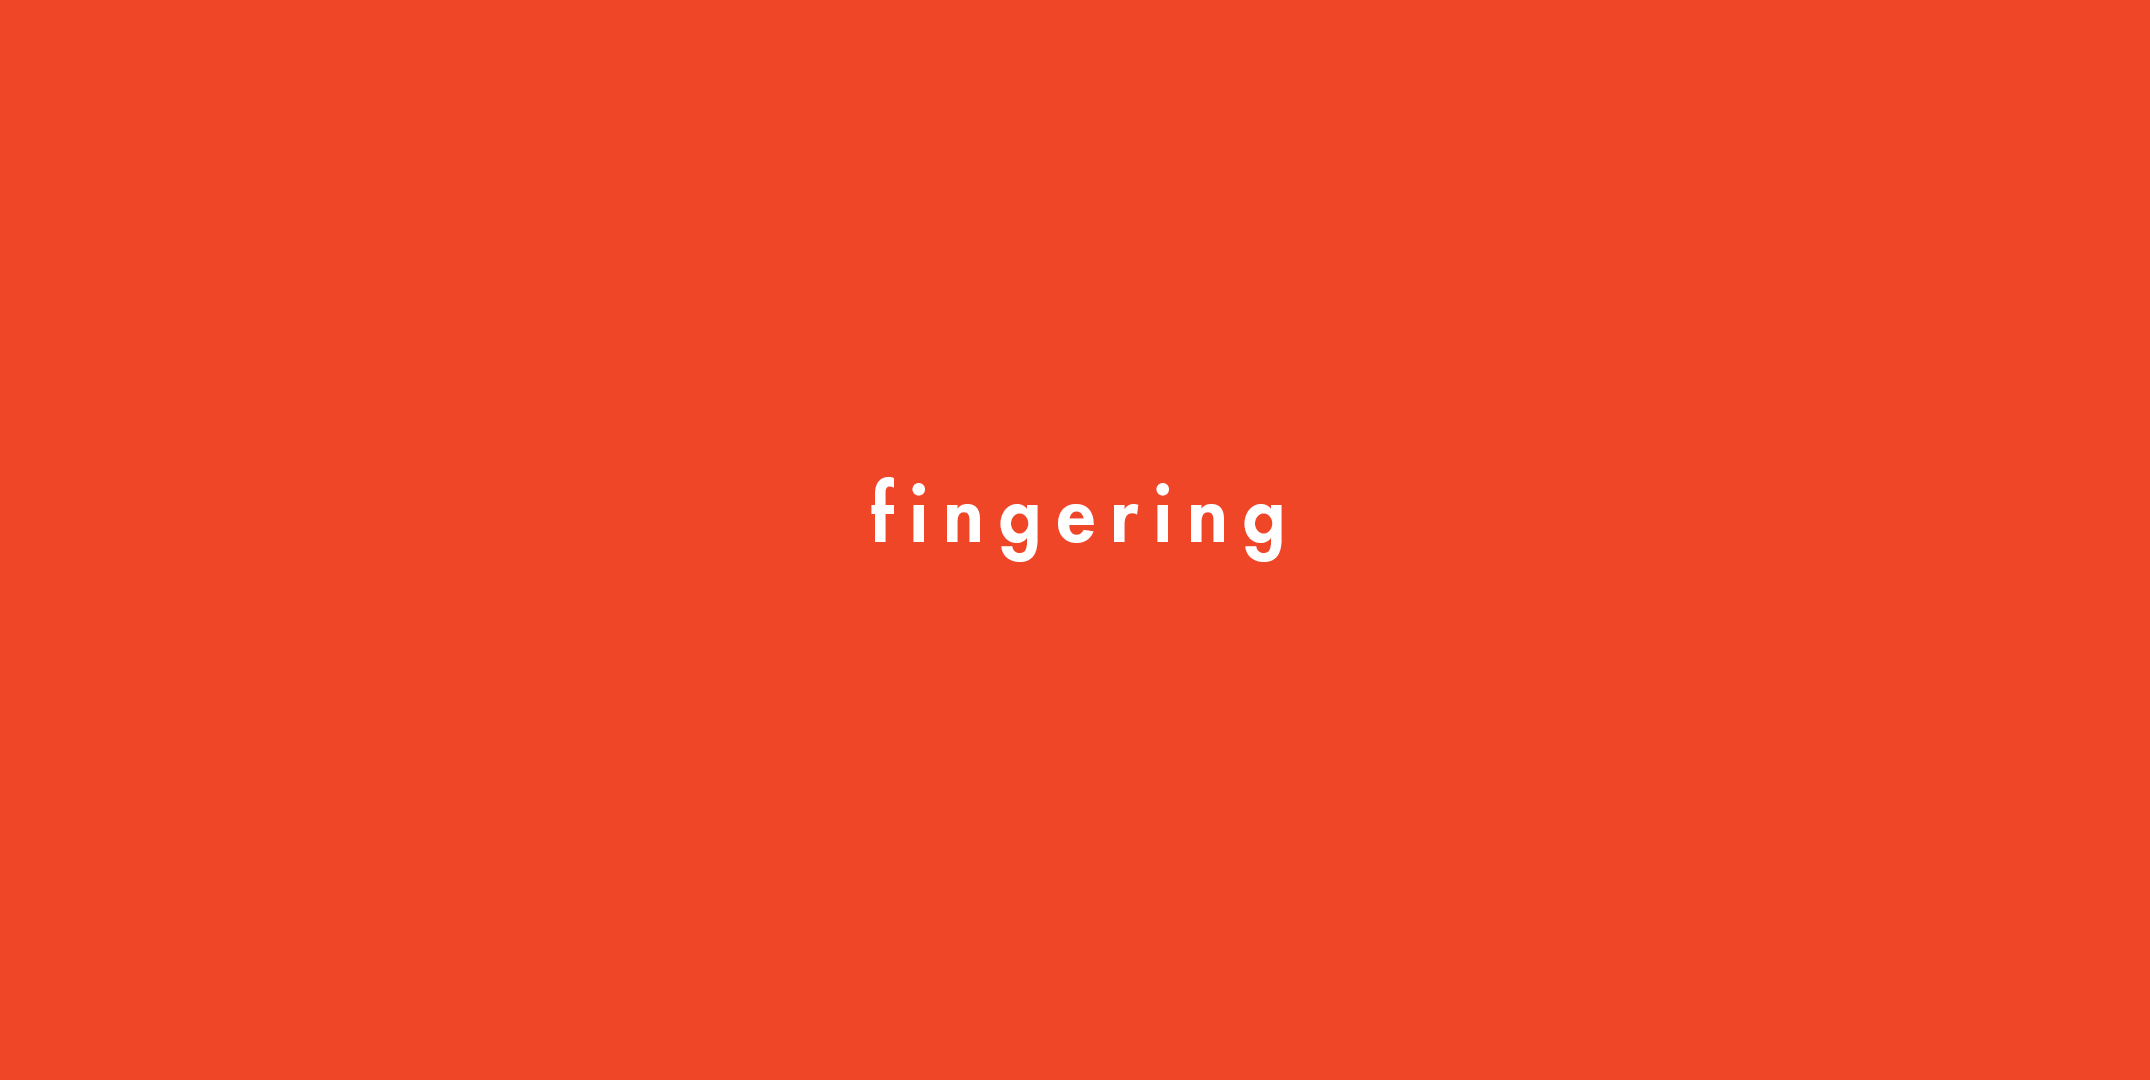 What Does Fingering Mean picture